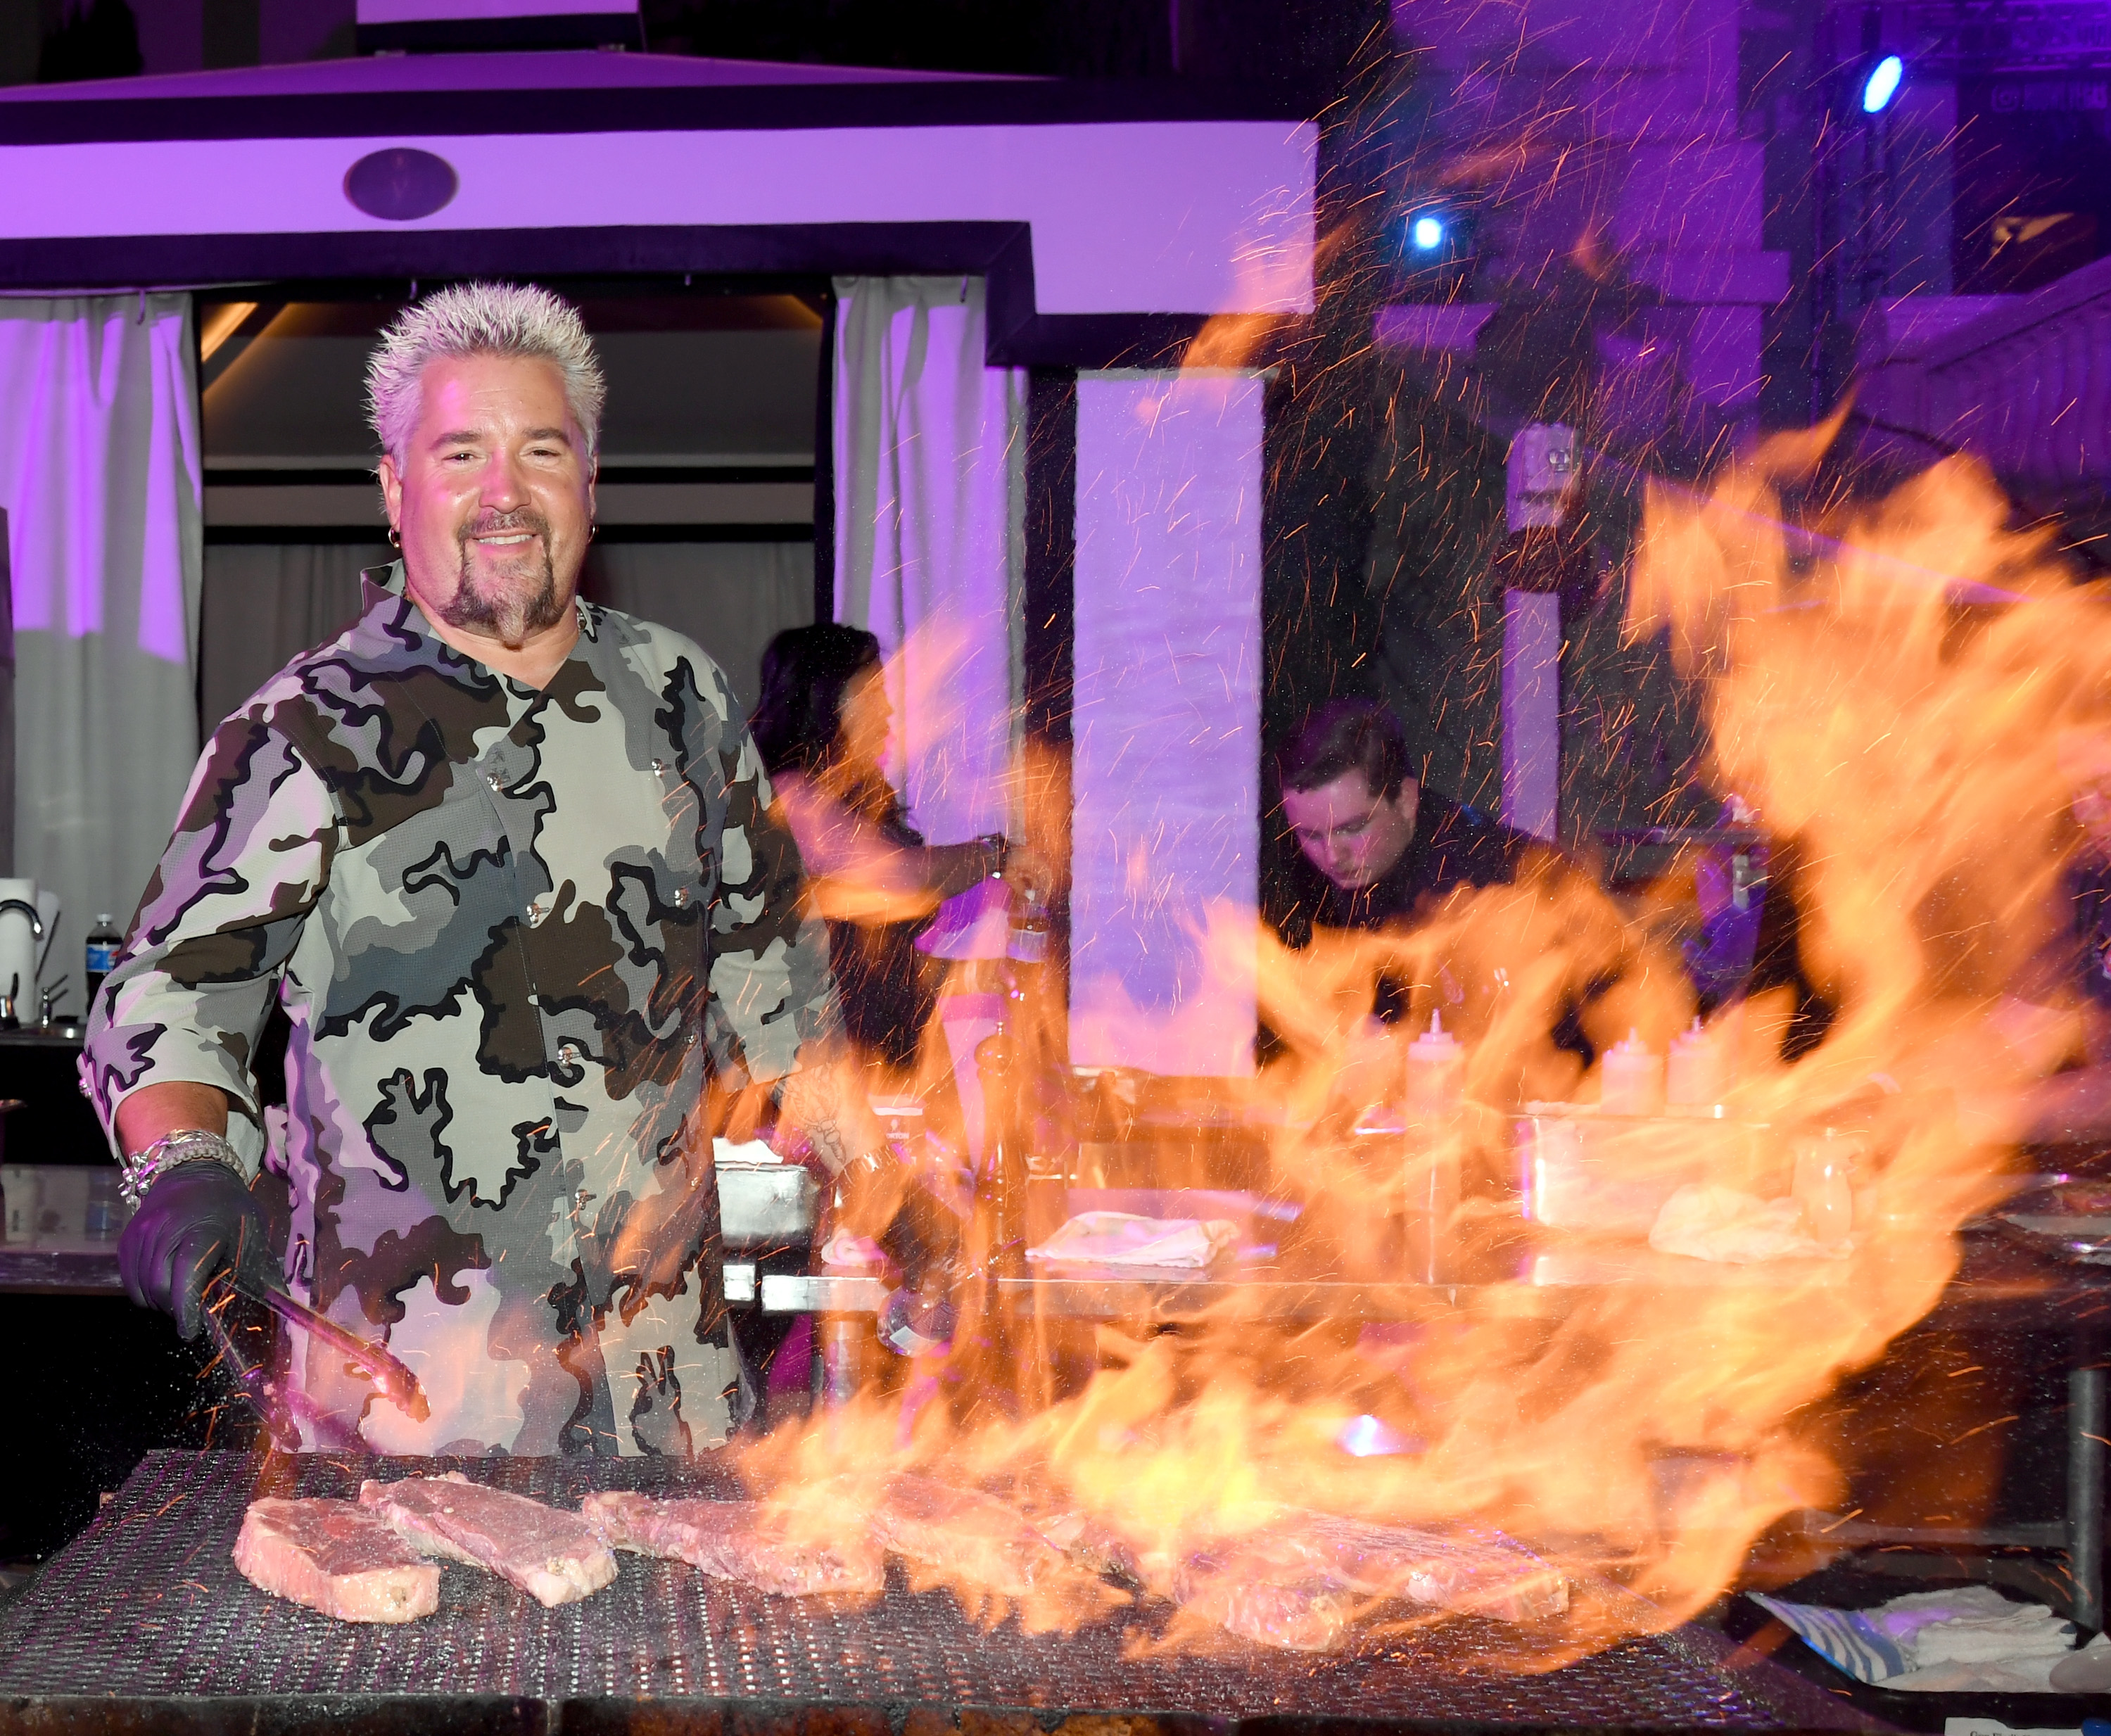 Guy Fieri grilling over a large fire